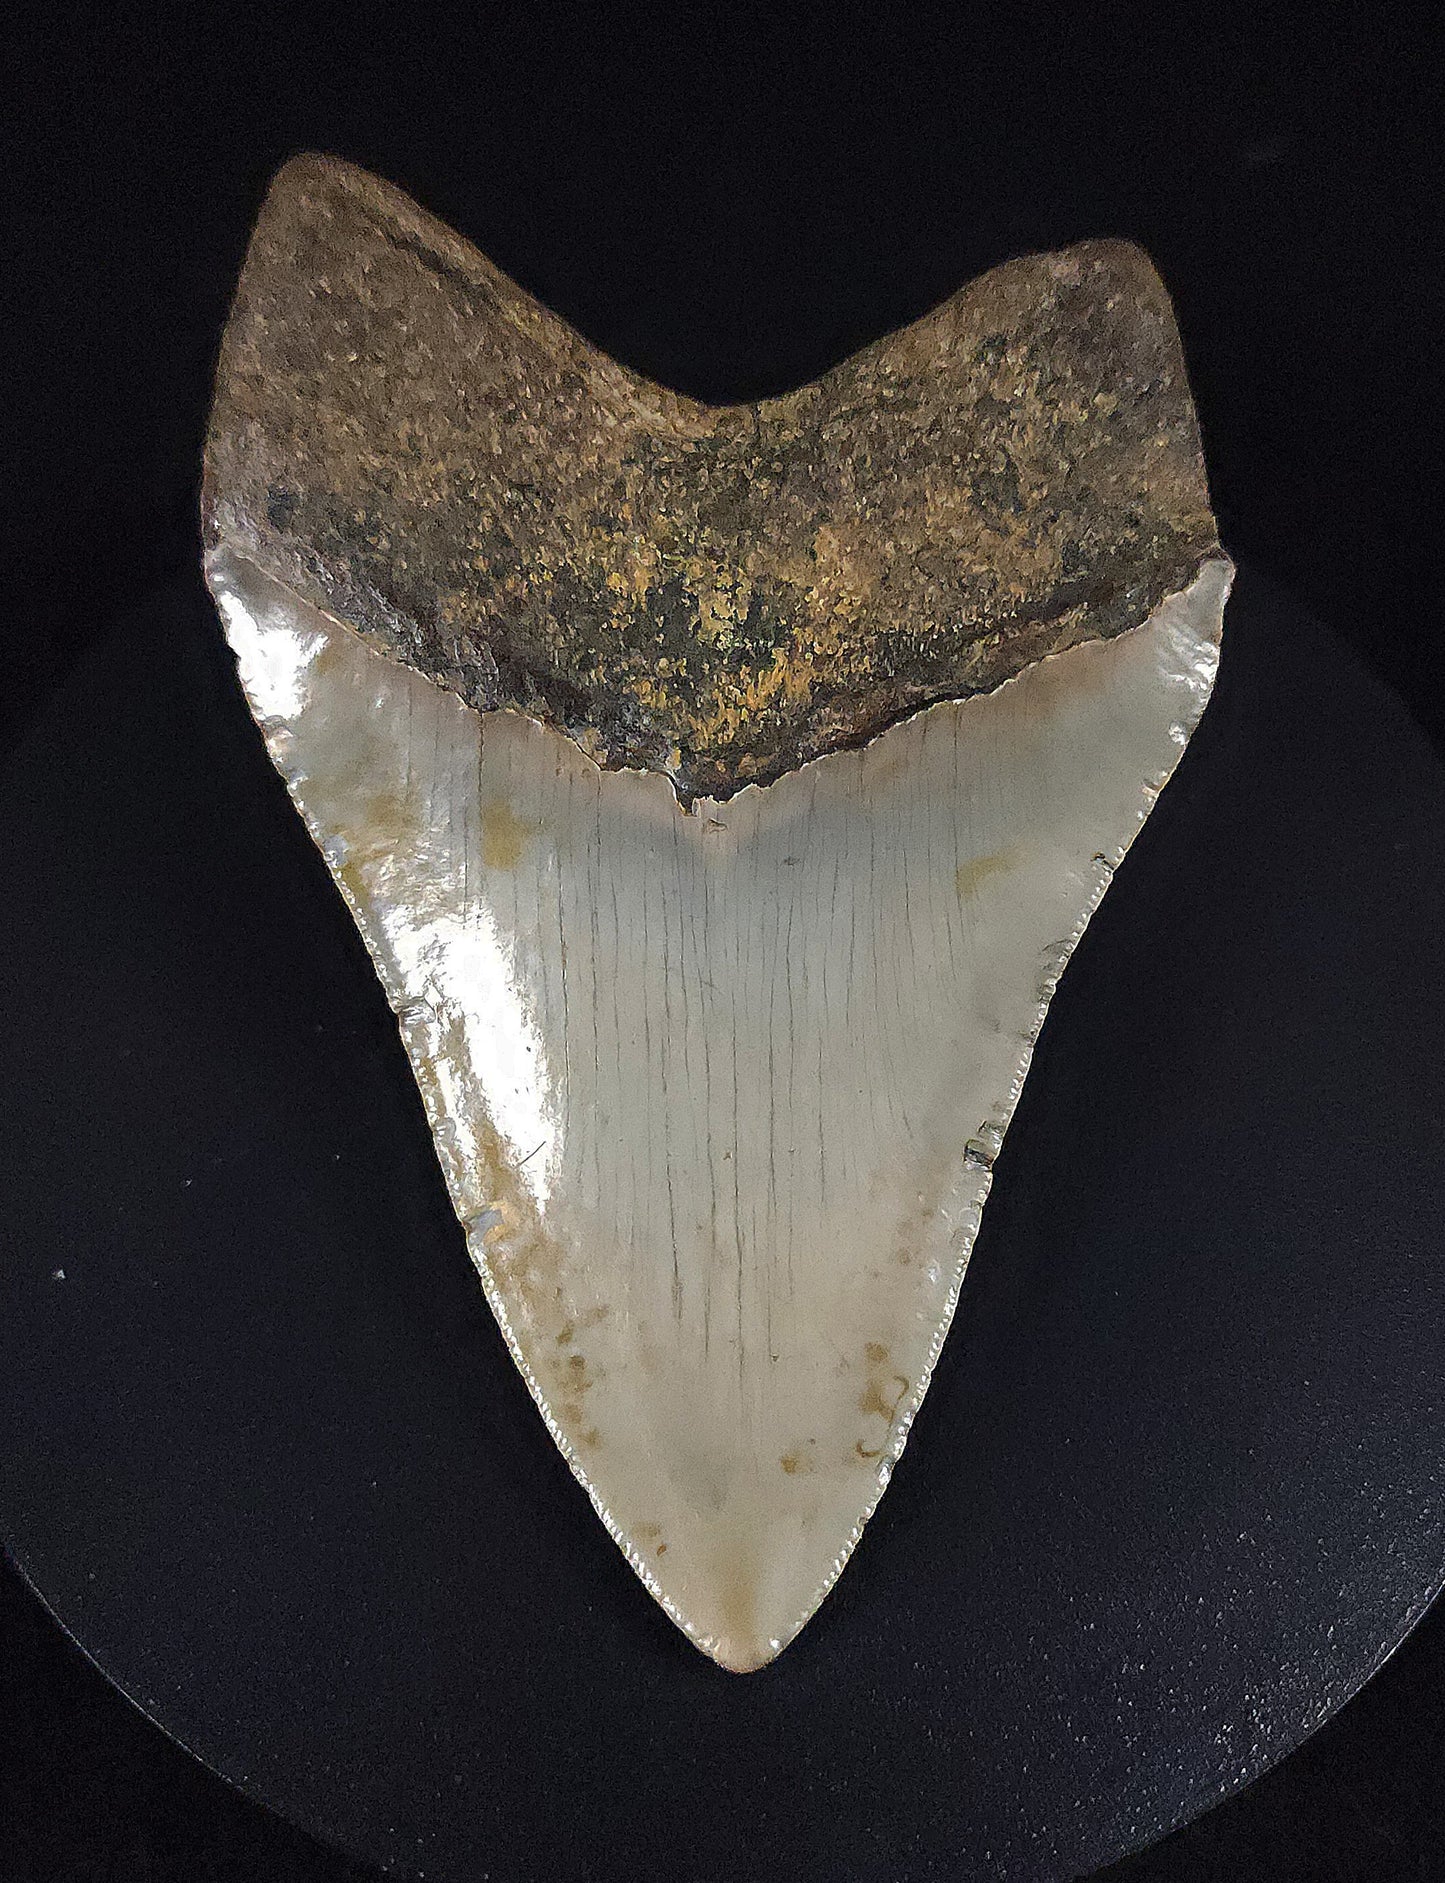 Authentic, 4.43" Fossil Megalodon Tooth - Meg Ledge